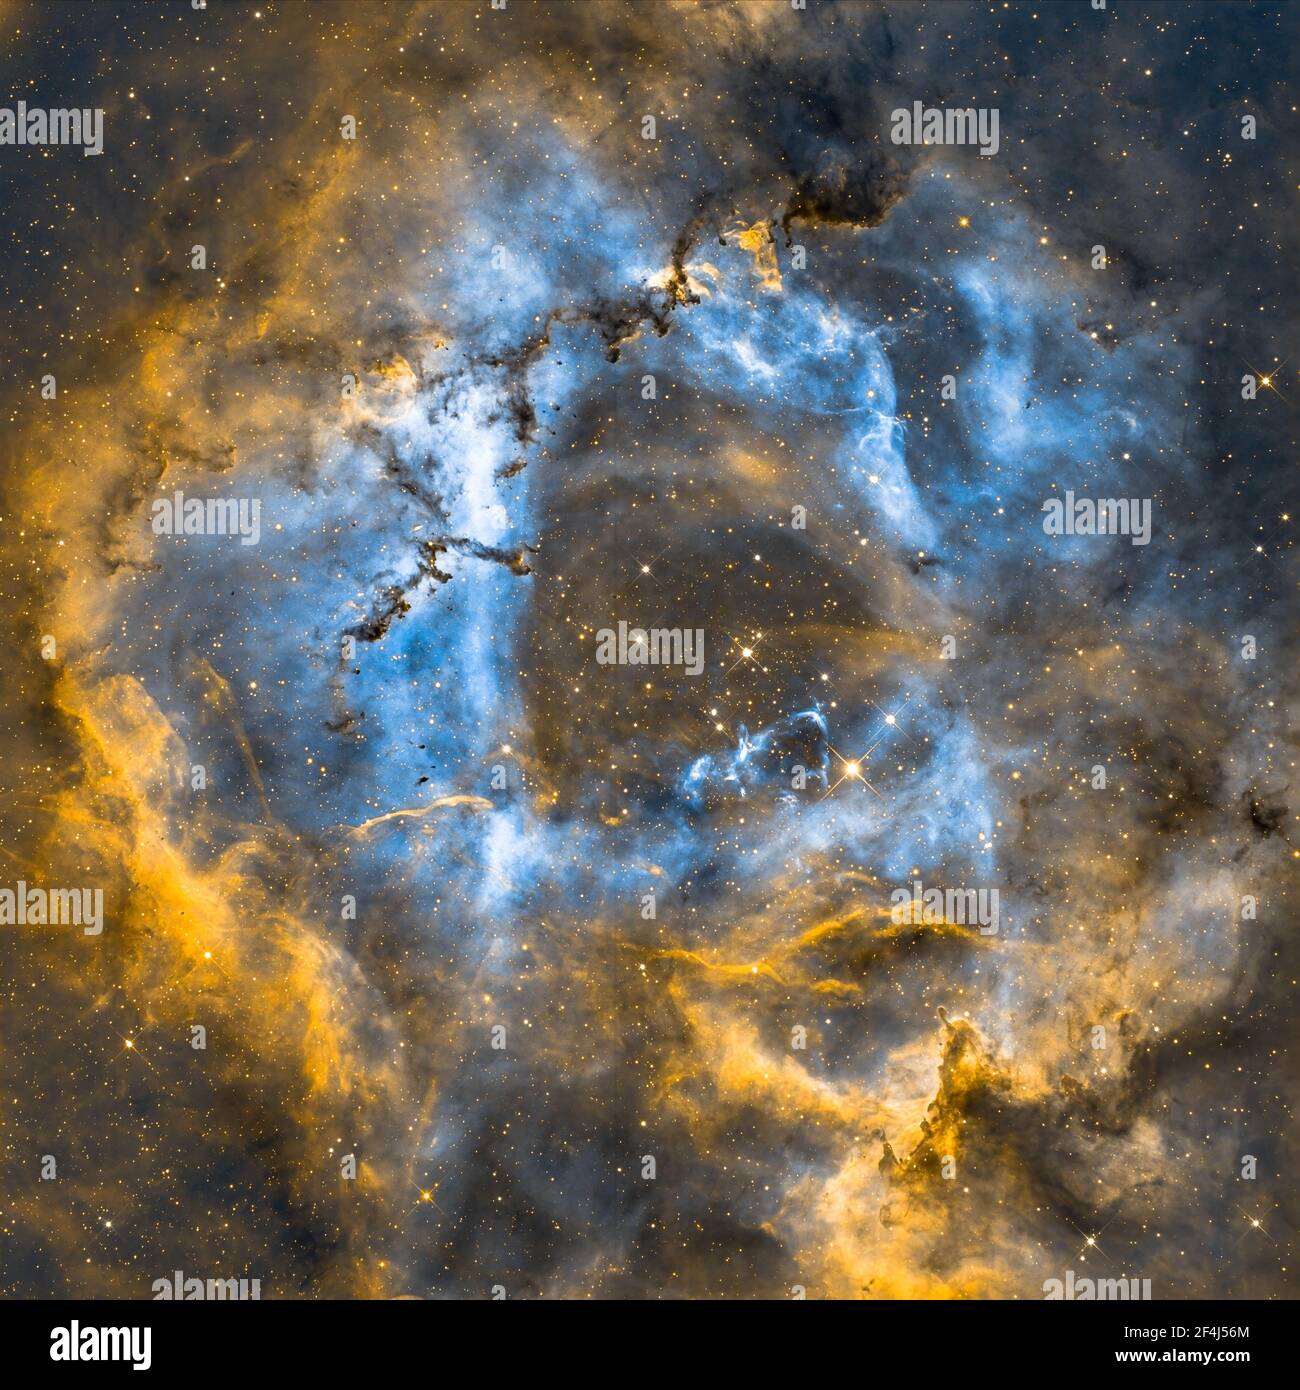 Rosette Nebula Pro Dataset Narrowband SHO The Rosette Nebula (also known as Caldwell 49) is a large spherical H II region Stock Photo